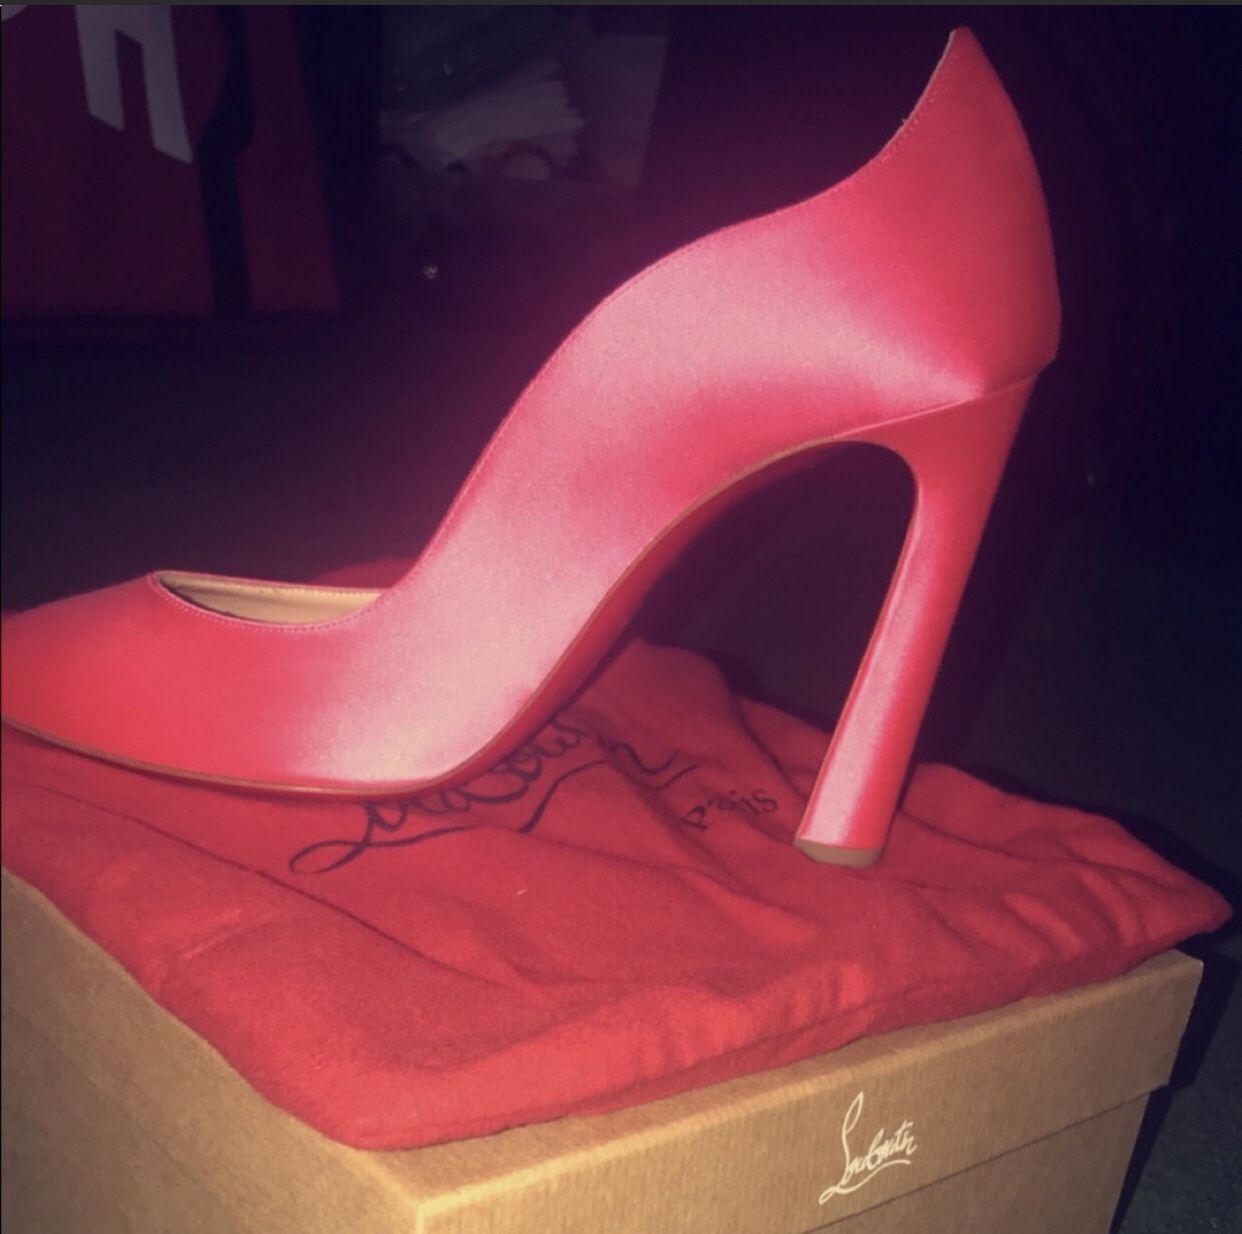 Christain Louboutin Shoes